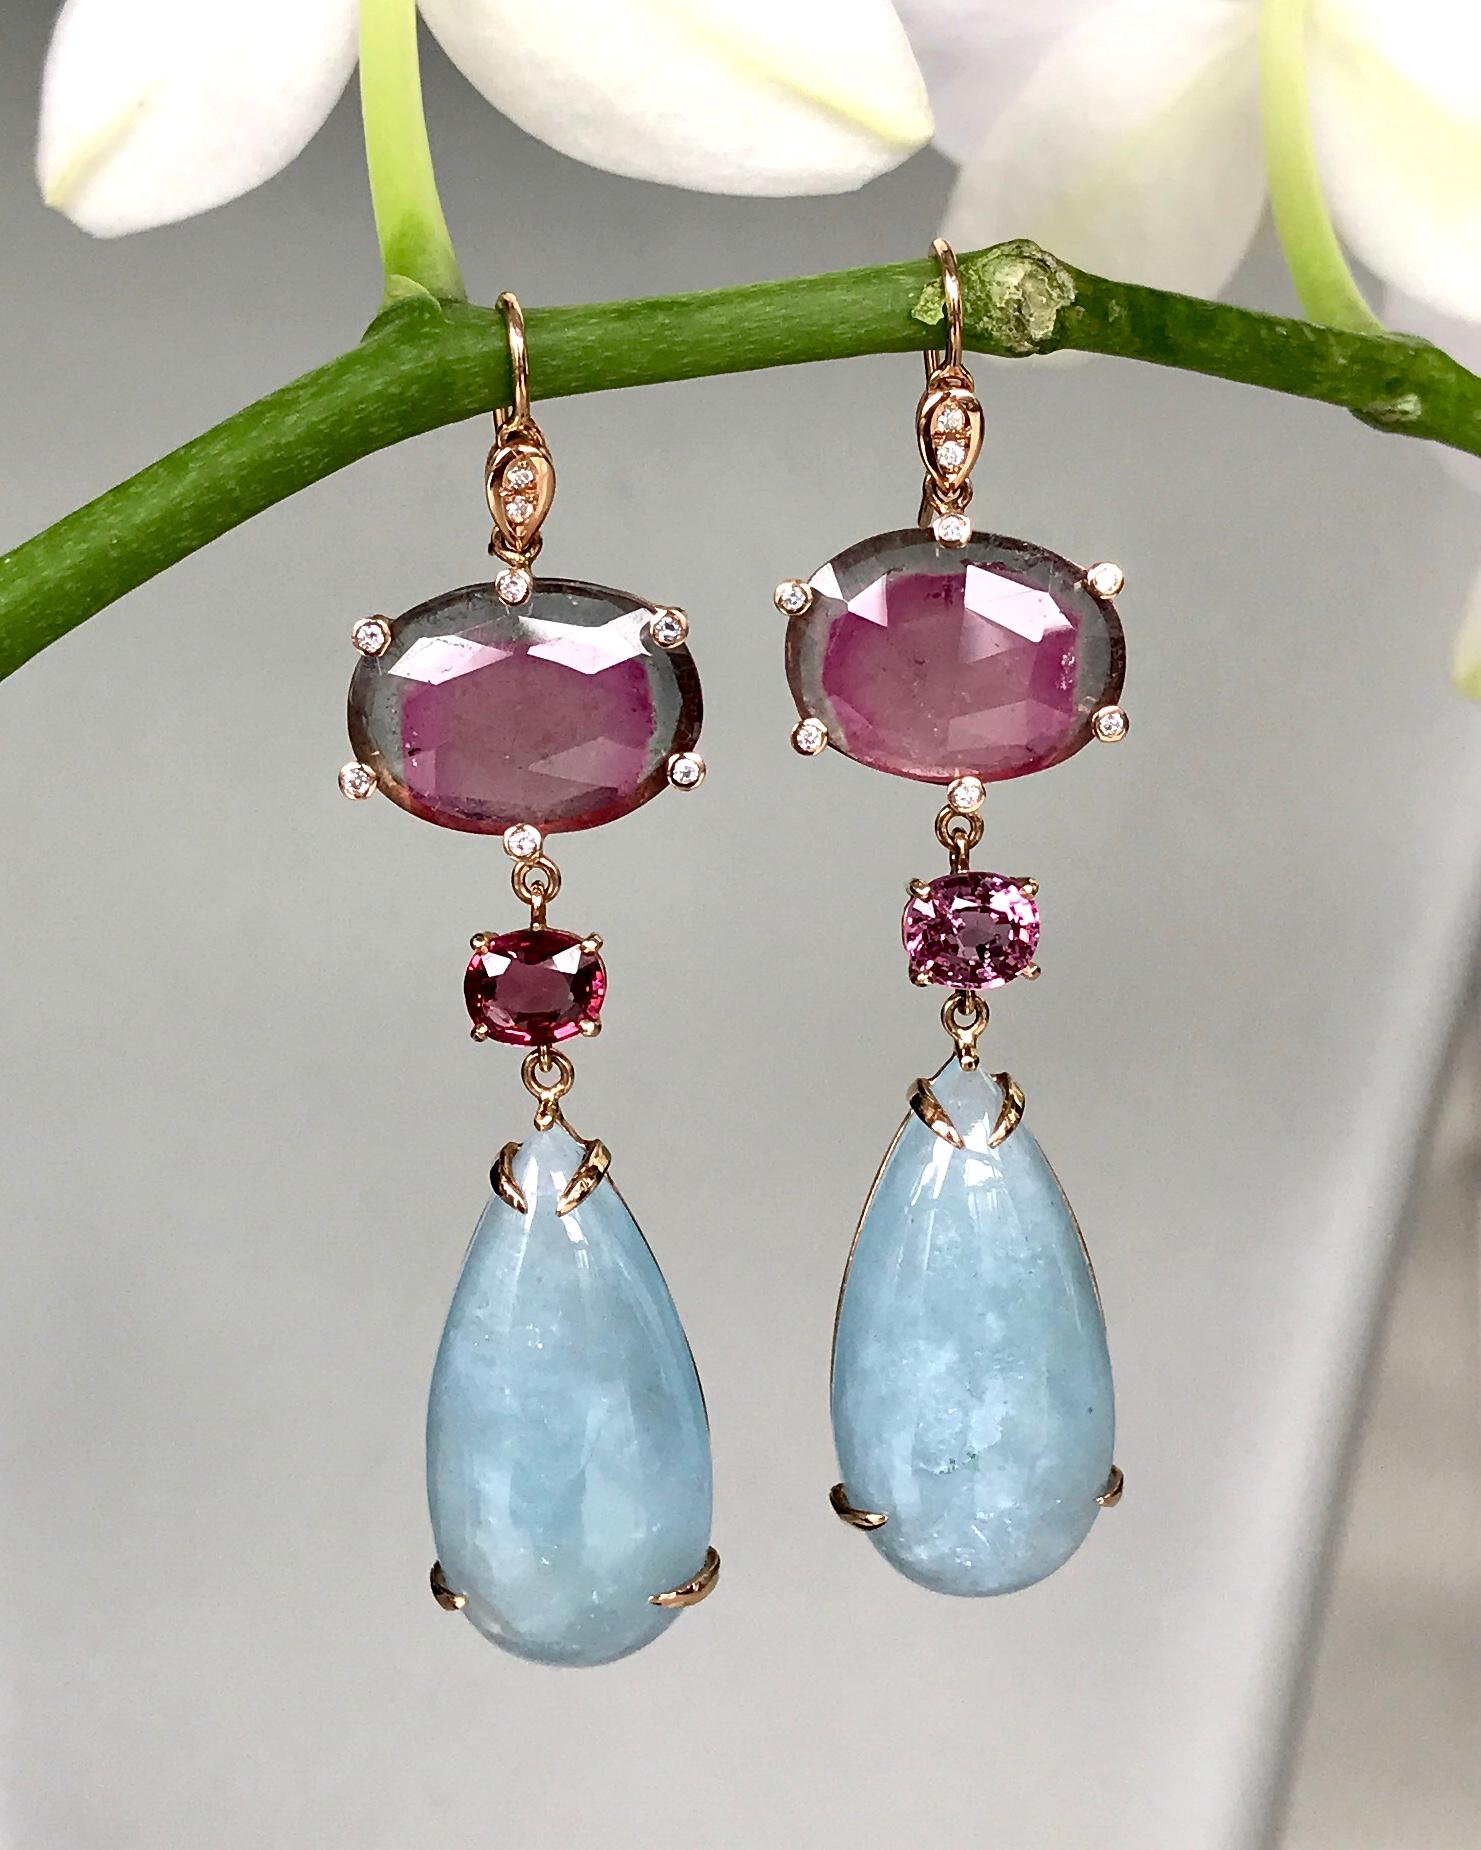 One-of-a-kind rose-cut bicolor tourmaline, cabochon aquamarine, spinel and diamond drop dangle earrings, handcrafted in 18 karat rose gold. 2 3/4 inches or 70 mm length. 

These beautiful earrings of watermelon tourmalines accented by white